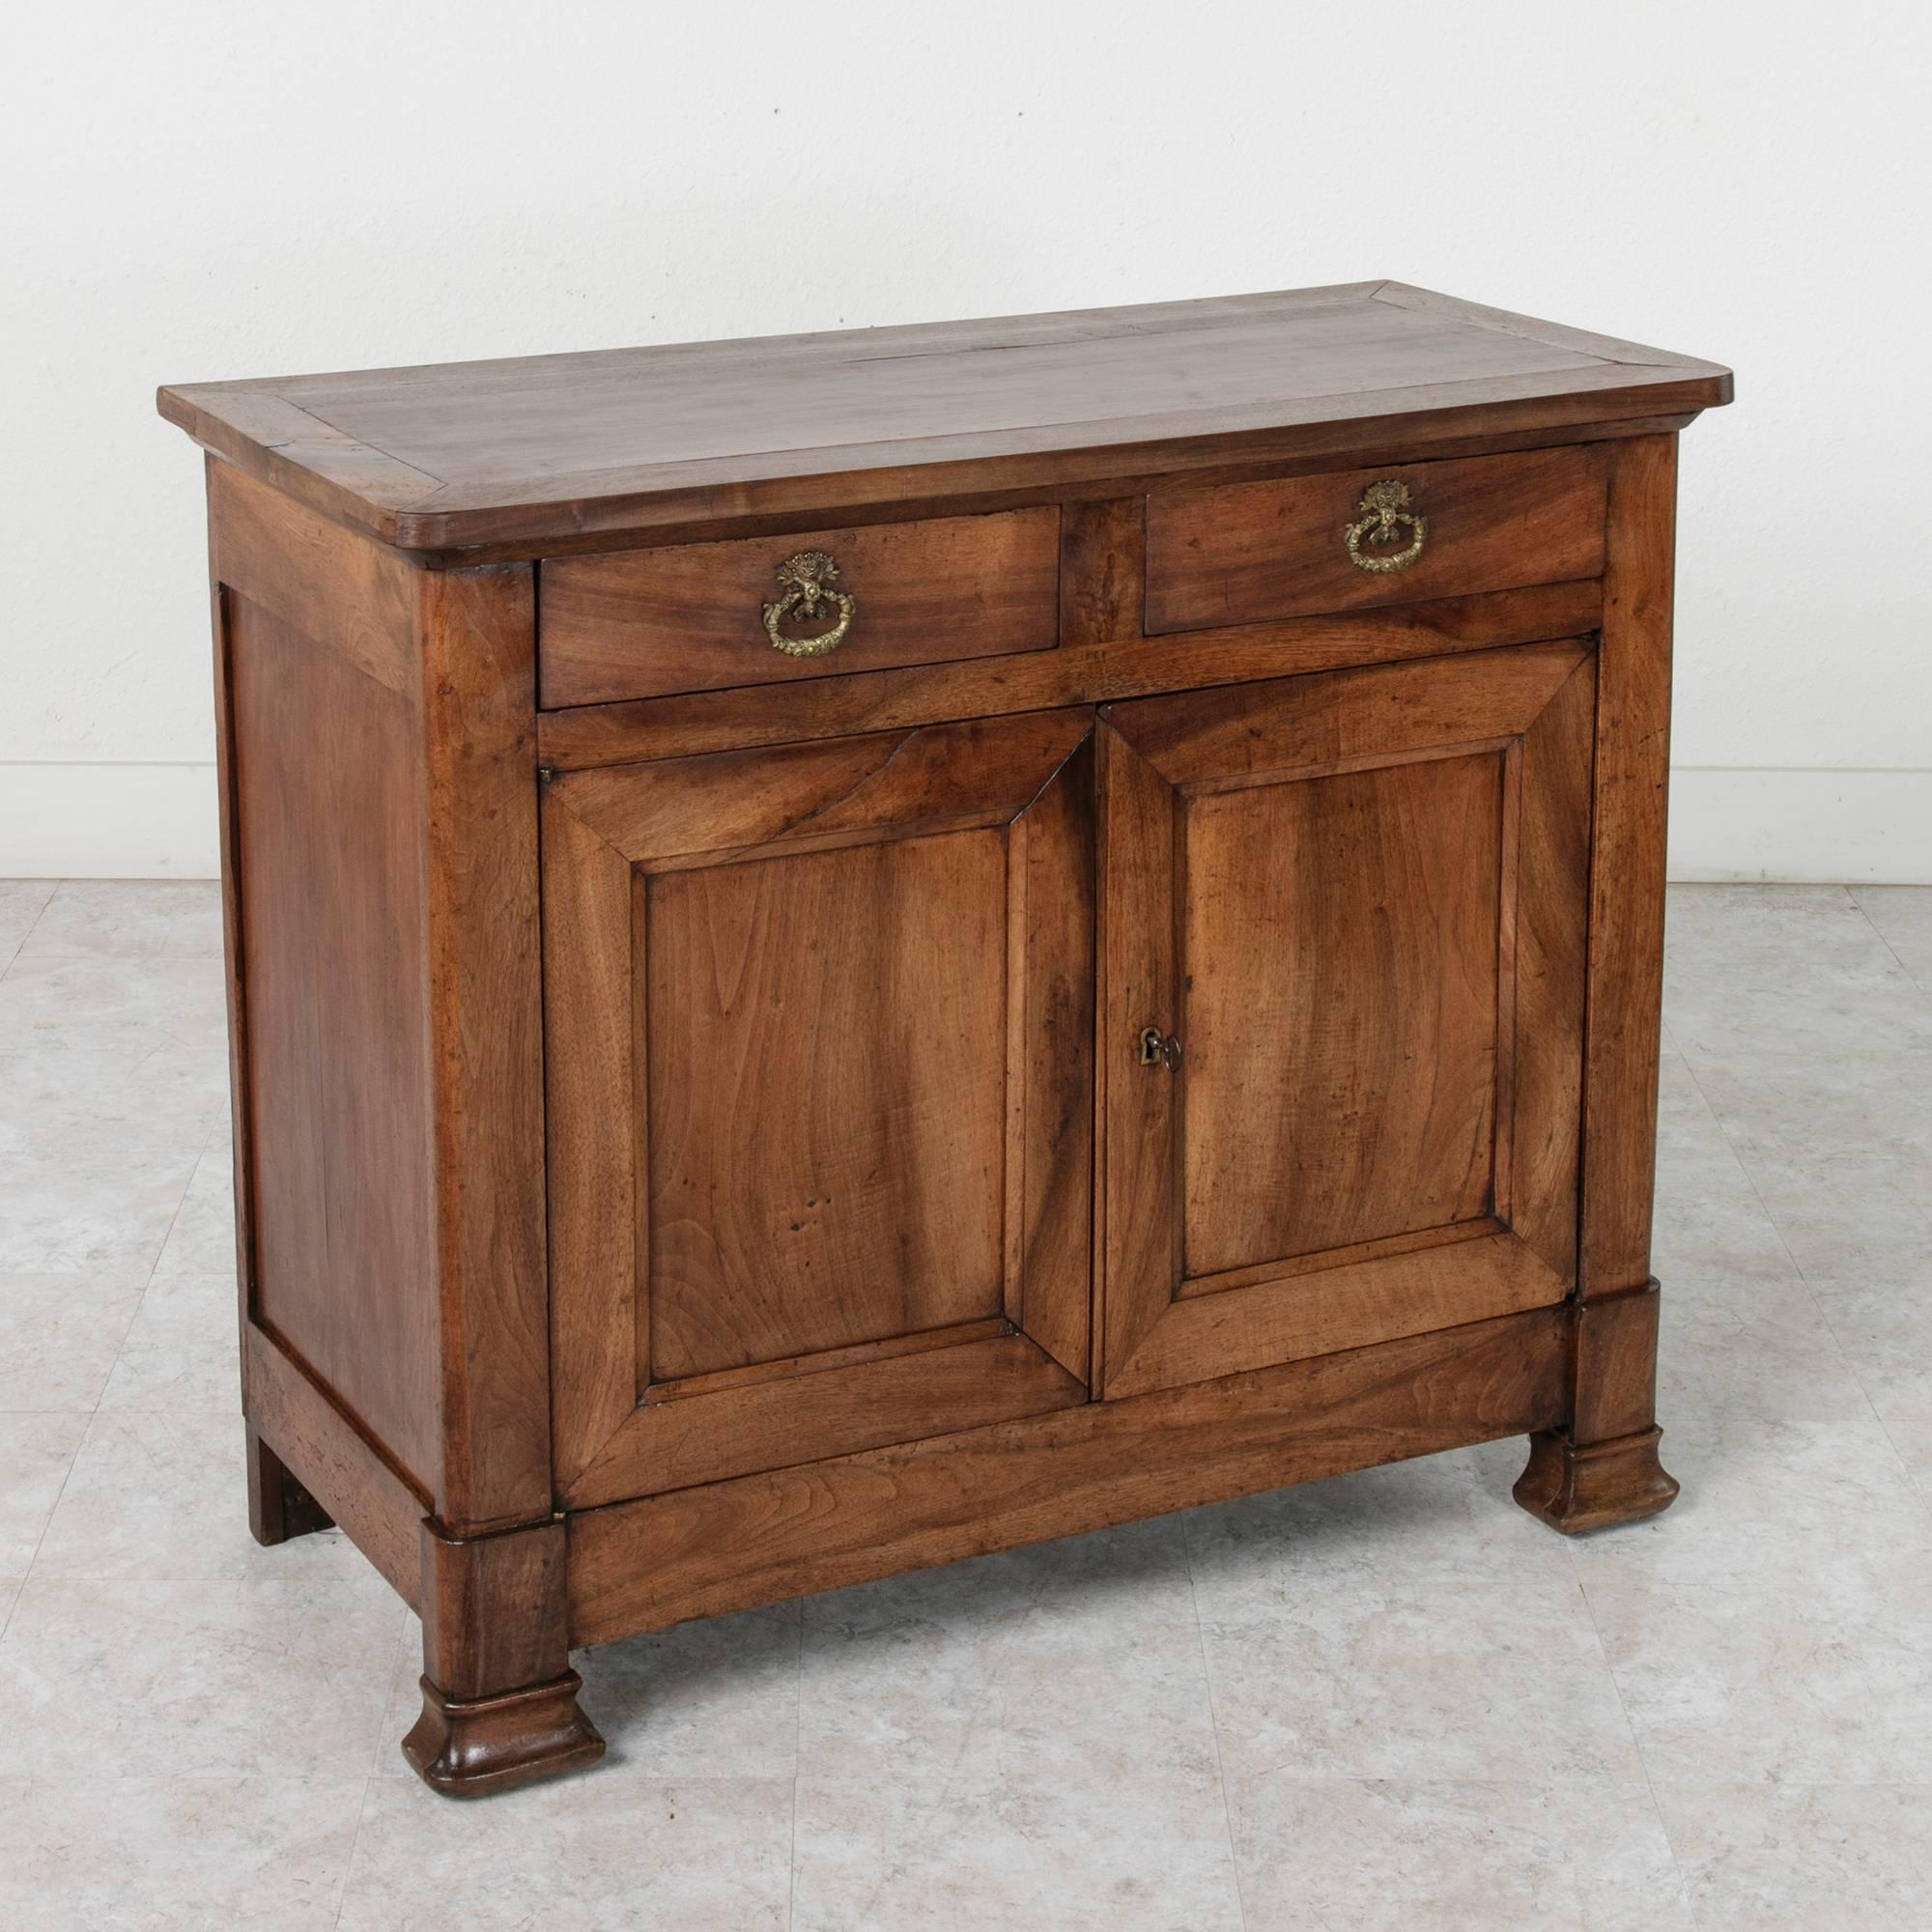 The Classic, simple lines of this 19th century Louis Philippe period buffet are at home in both contemporary and traditional interiors. Of solid walnut and hand pegged construction, this piece features two upper drawers adorned with bronze drop